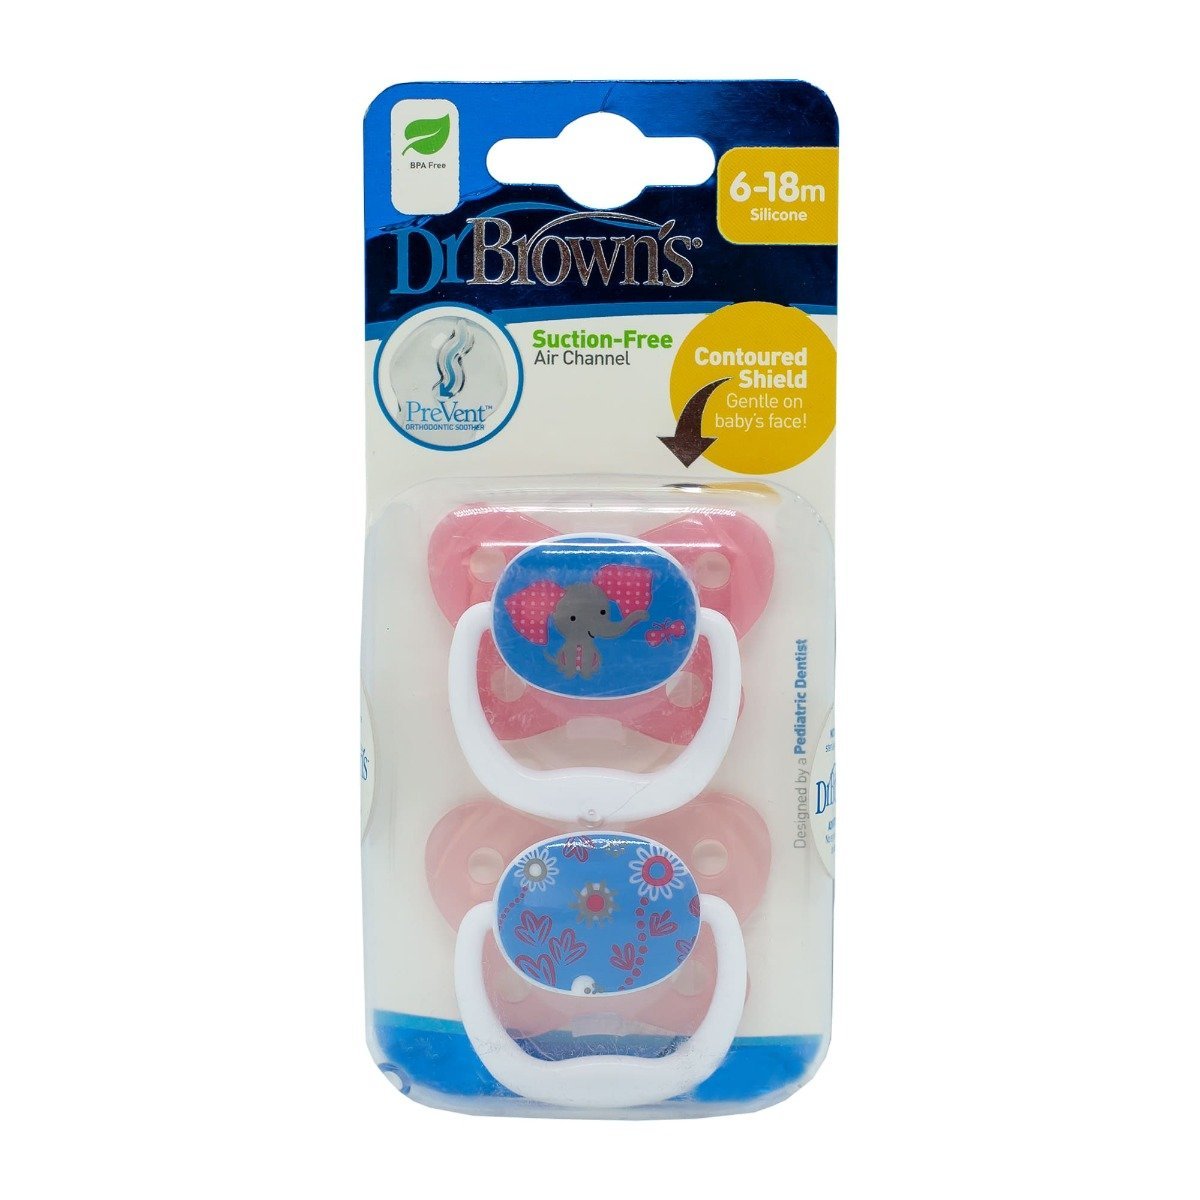 Dr. Brown's Prevent Contoured Pacifier 6-18m – Pink - Bloom Pharmacy